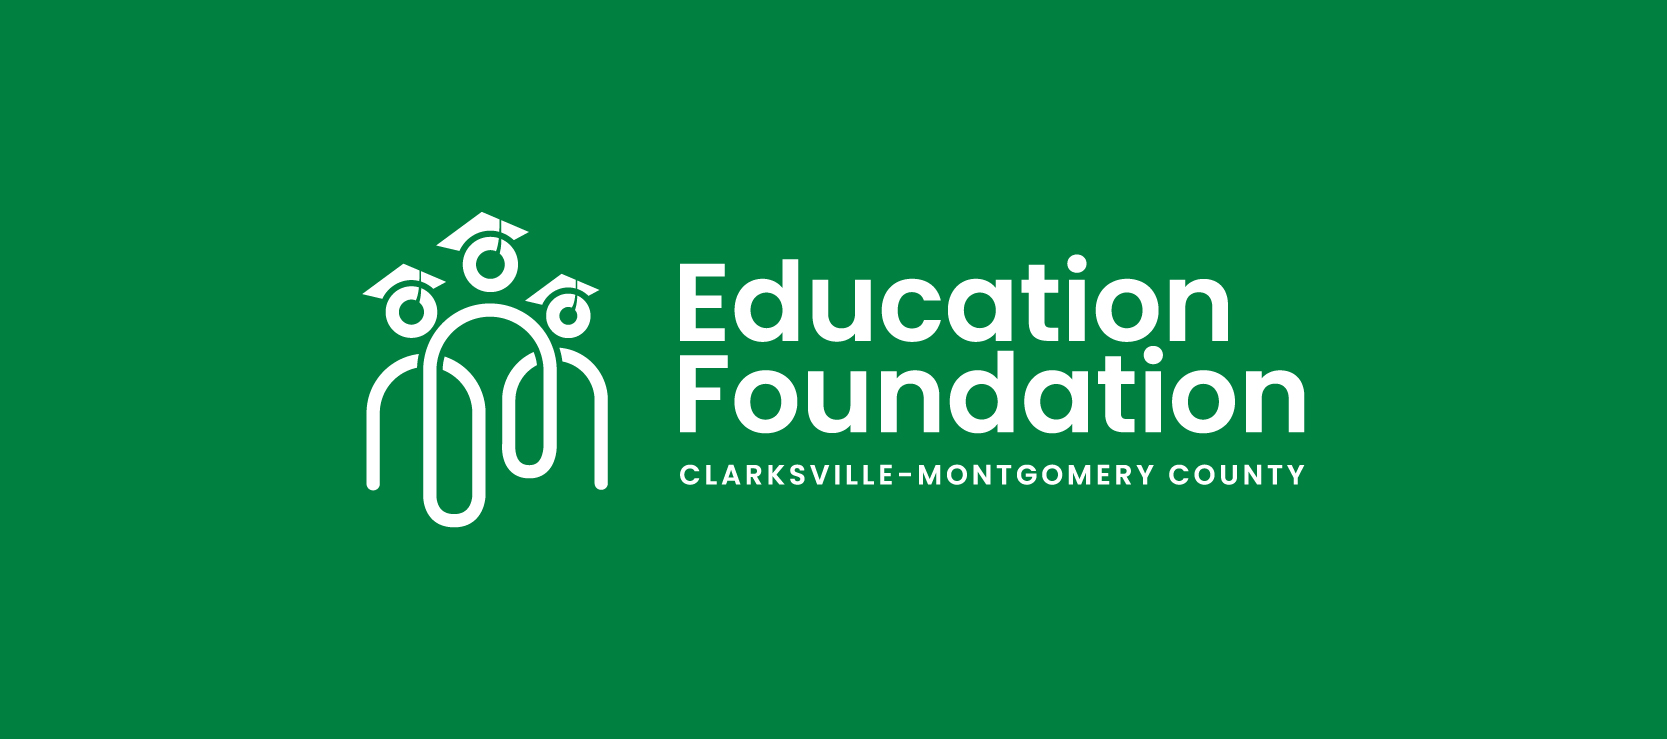 Redesign of Education Foundation